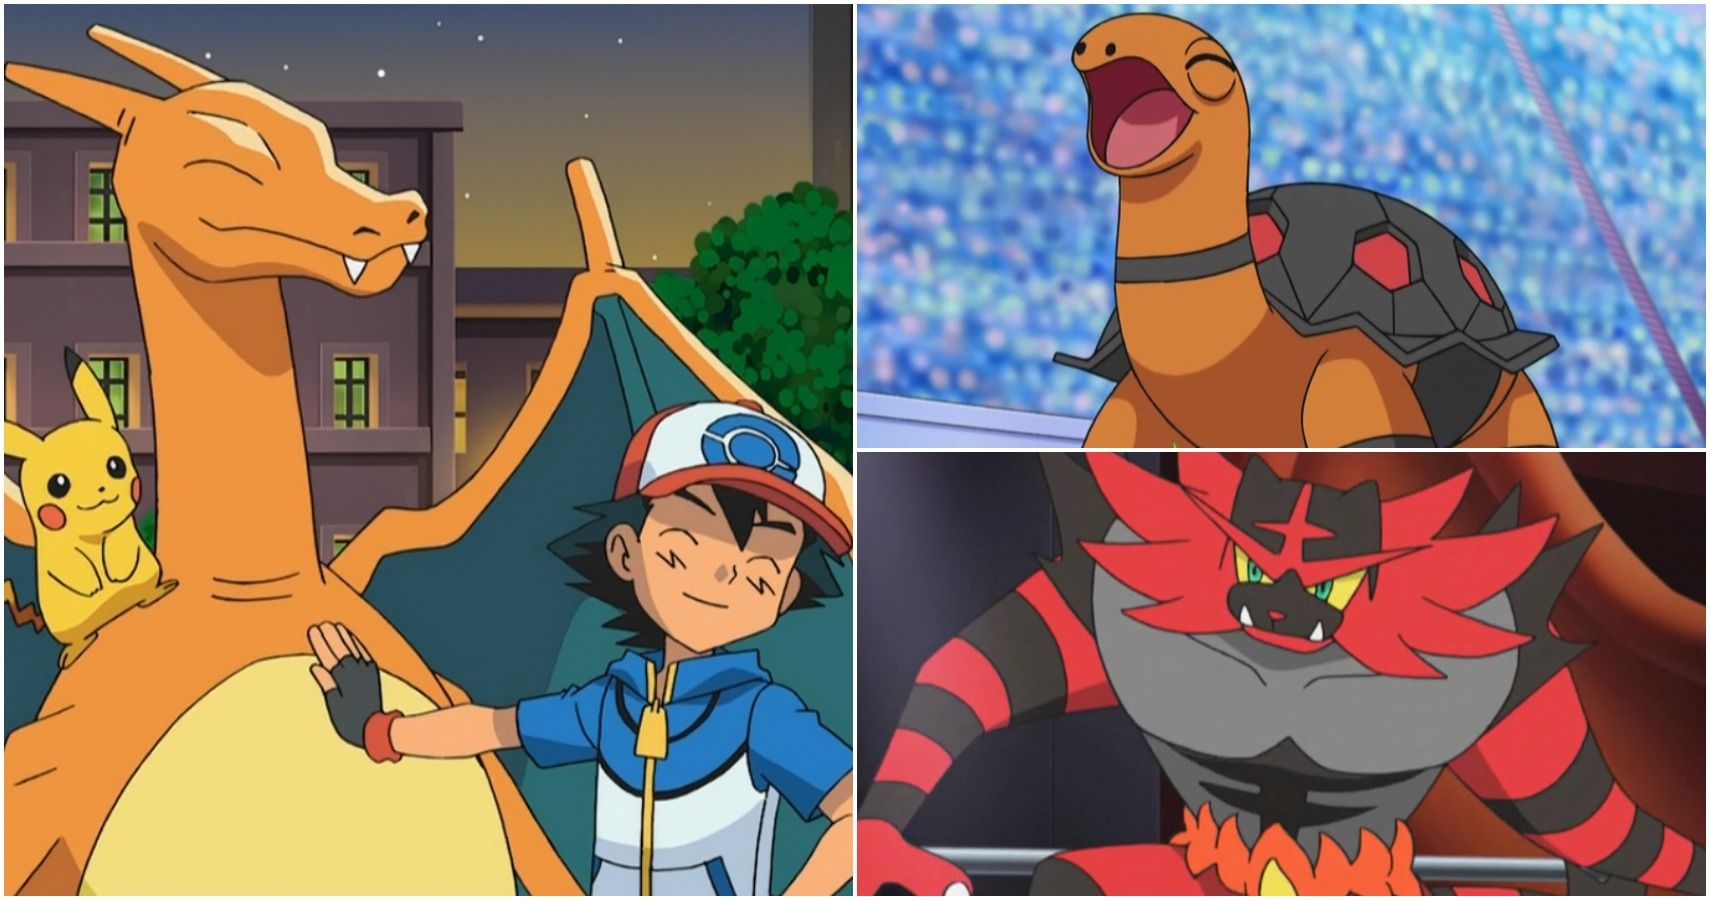 Every Flying-type Pokemon Ash Ketchum Has Caught So Far, Ranked